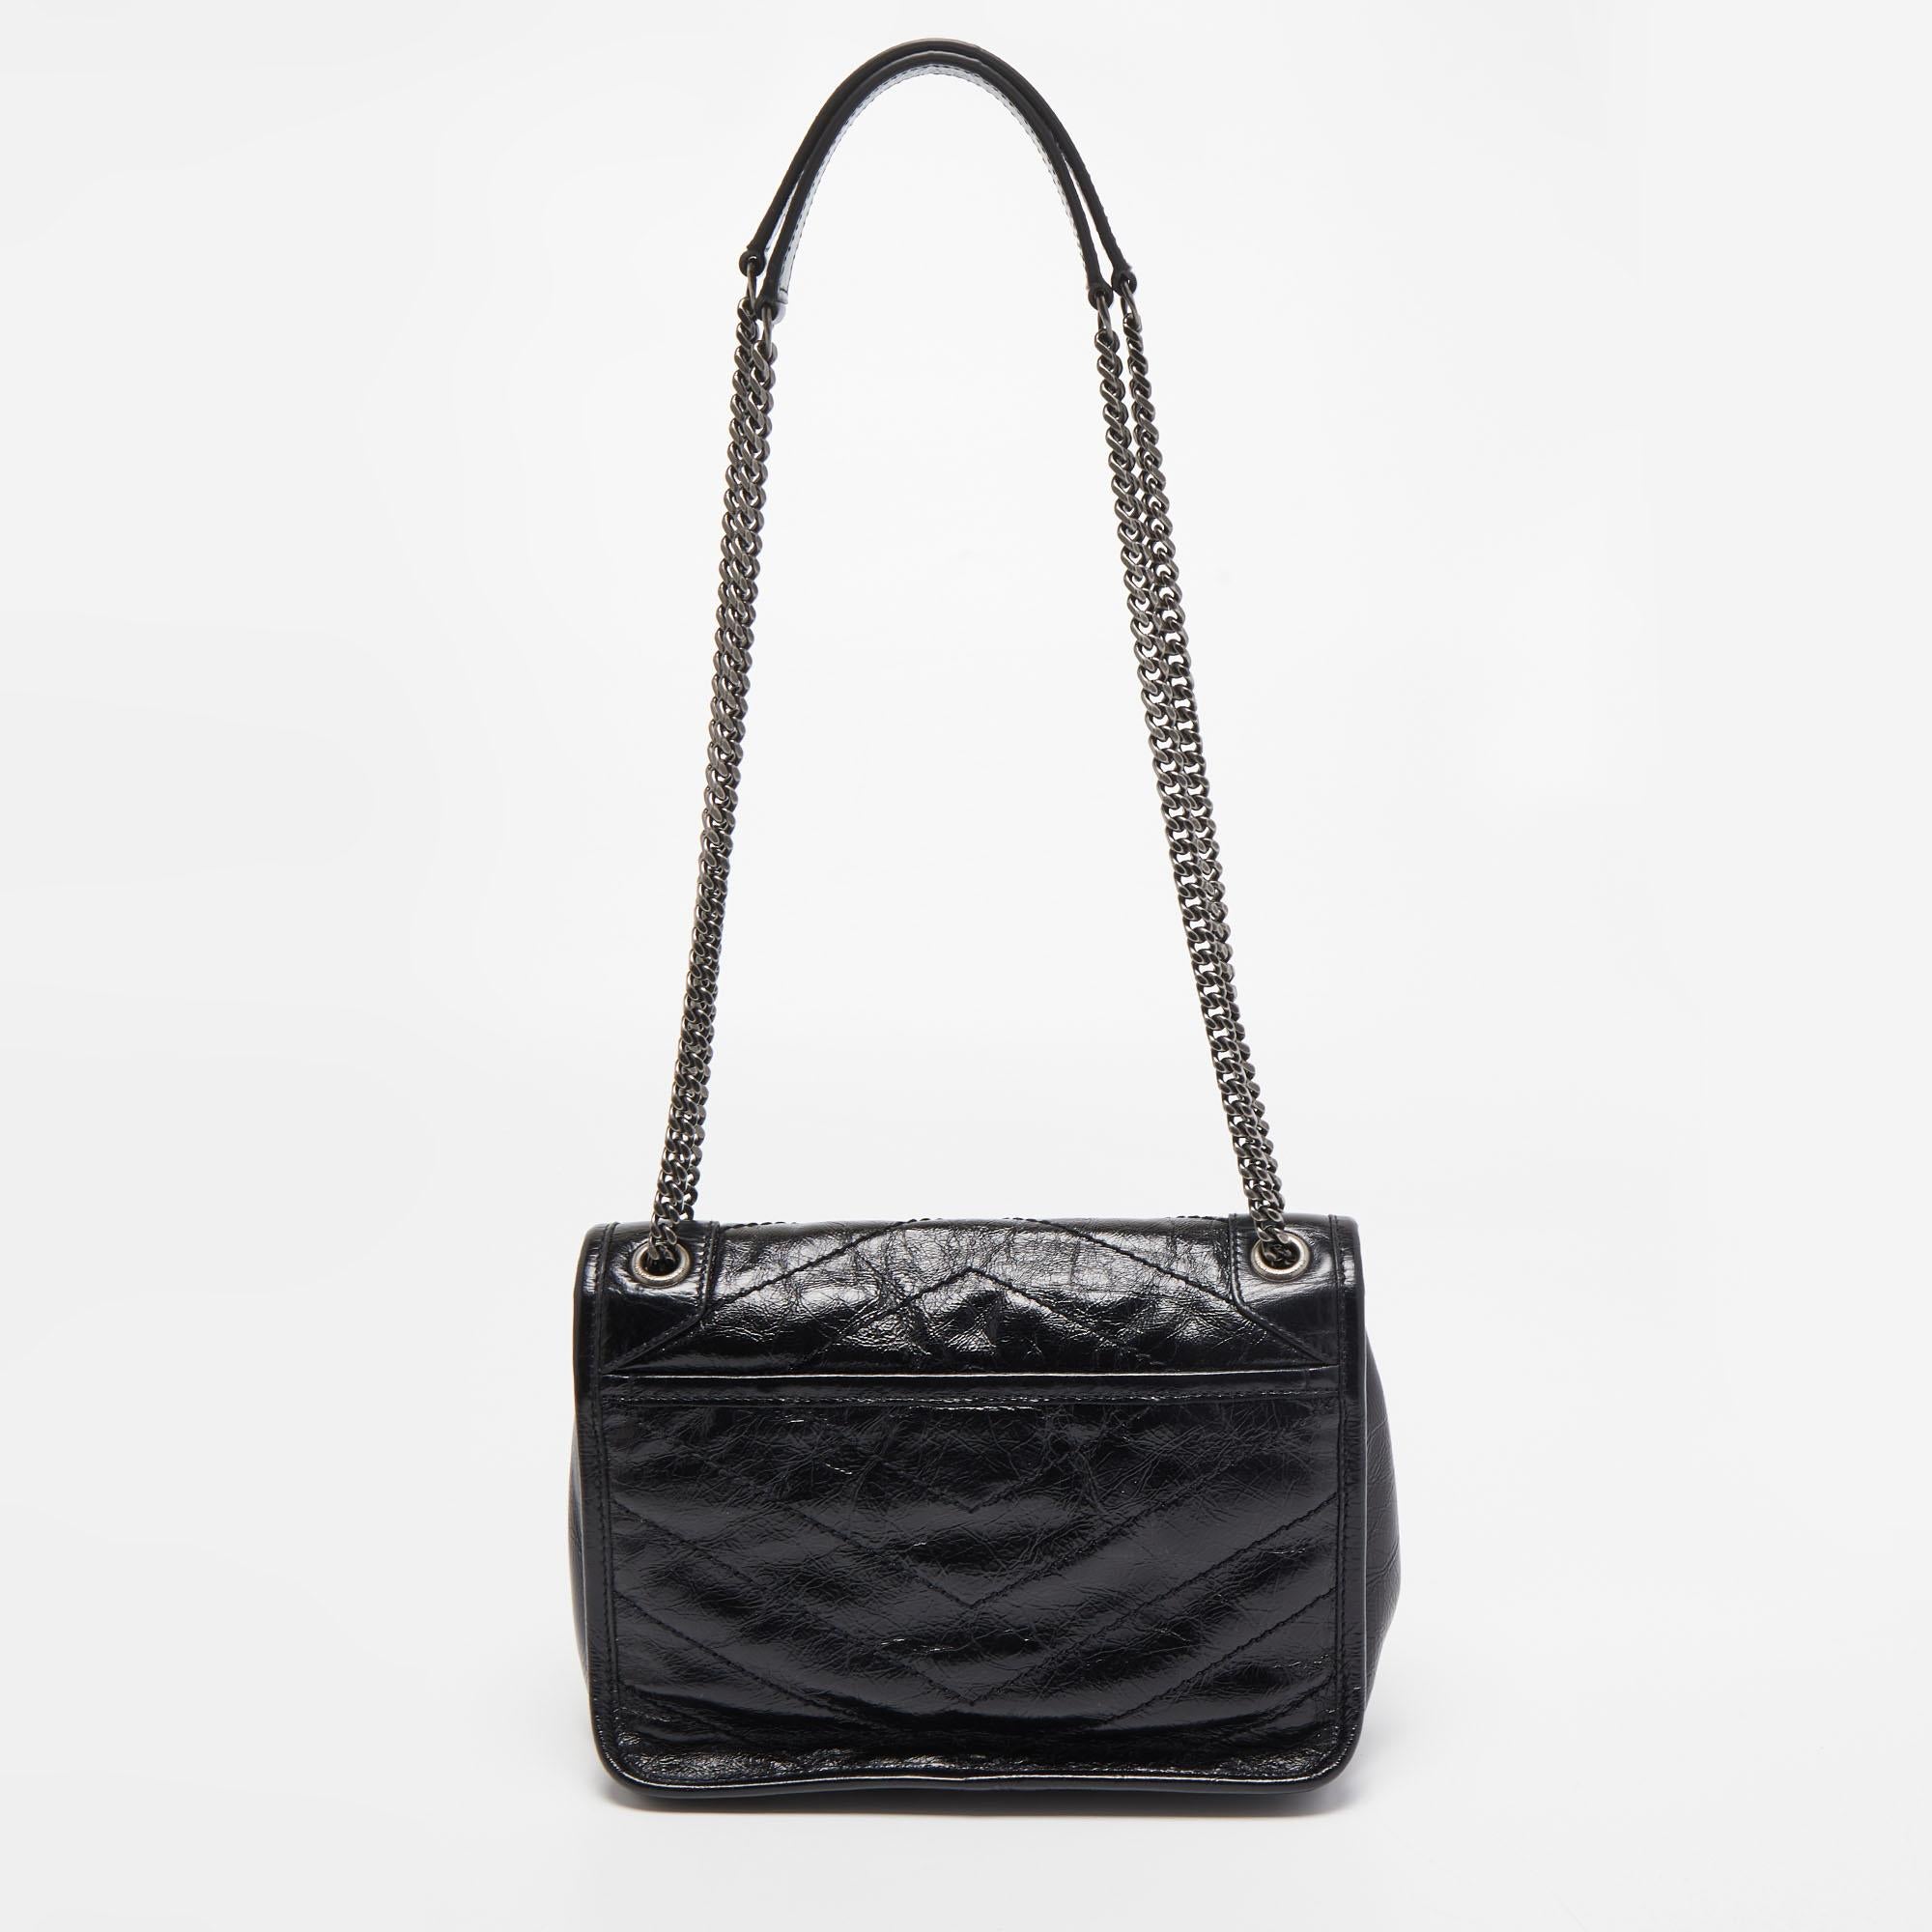 If you are looking for something that reflects chic and luxury, then this Saint Laurent bag is a perfect choice. Crafted from premium materials, it can be conveniently carried around, and its interior is spaciously sized to house your belongings